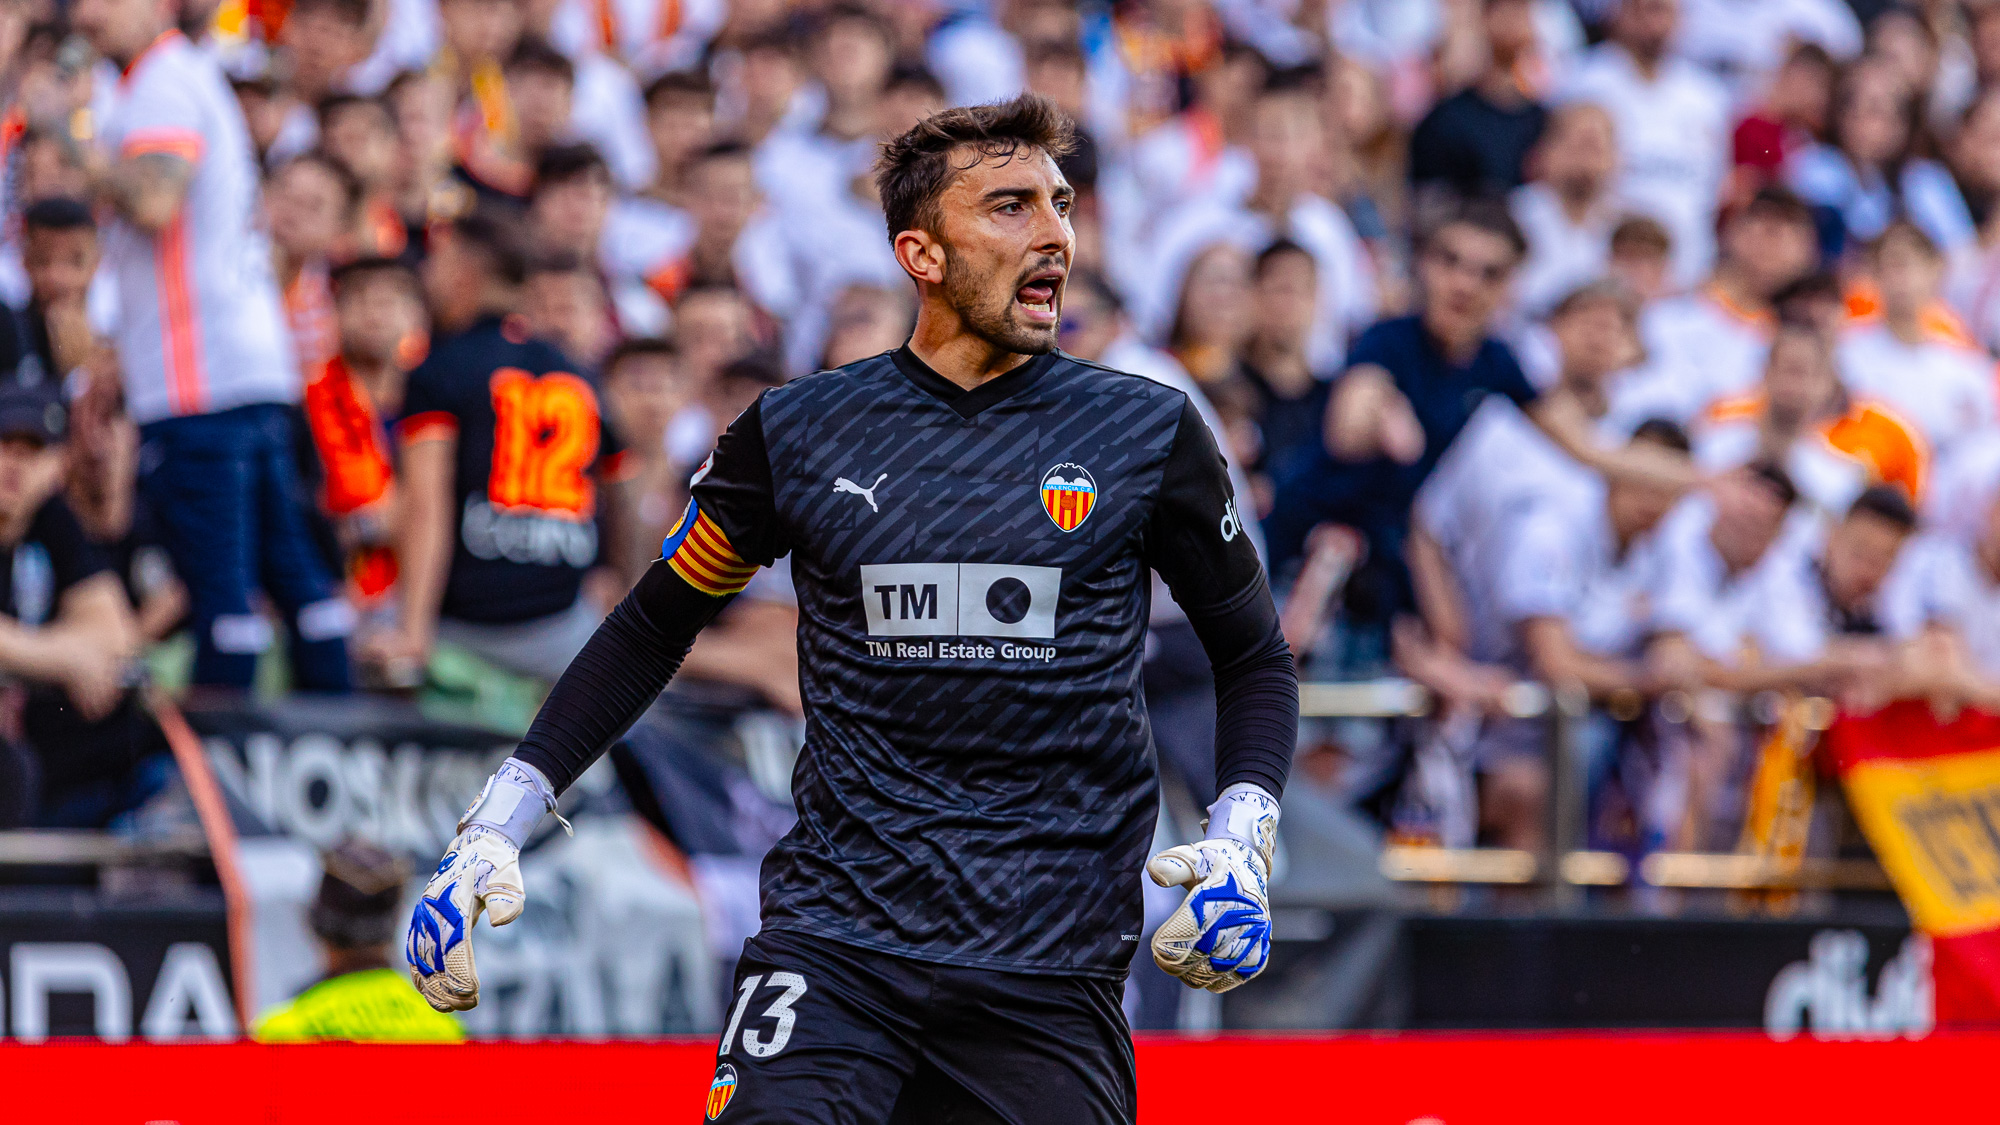 Valencia CF goalkeeper Cristian Rivero lives out his lifelong dream of playing for the VCF team in LALIGA”.